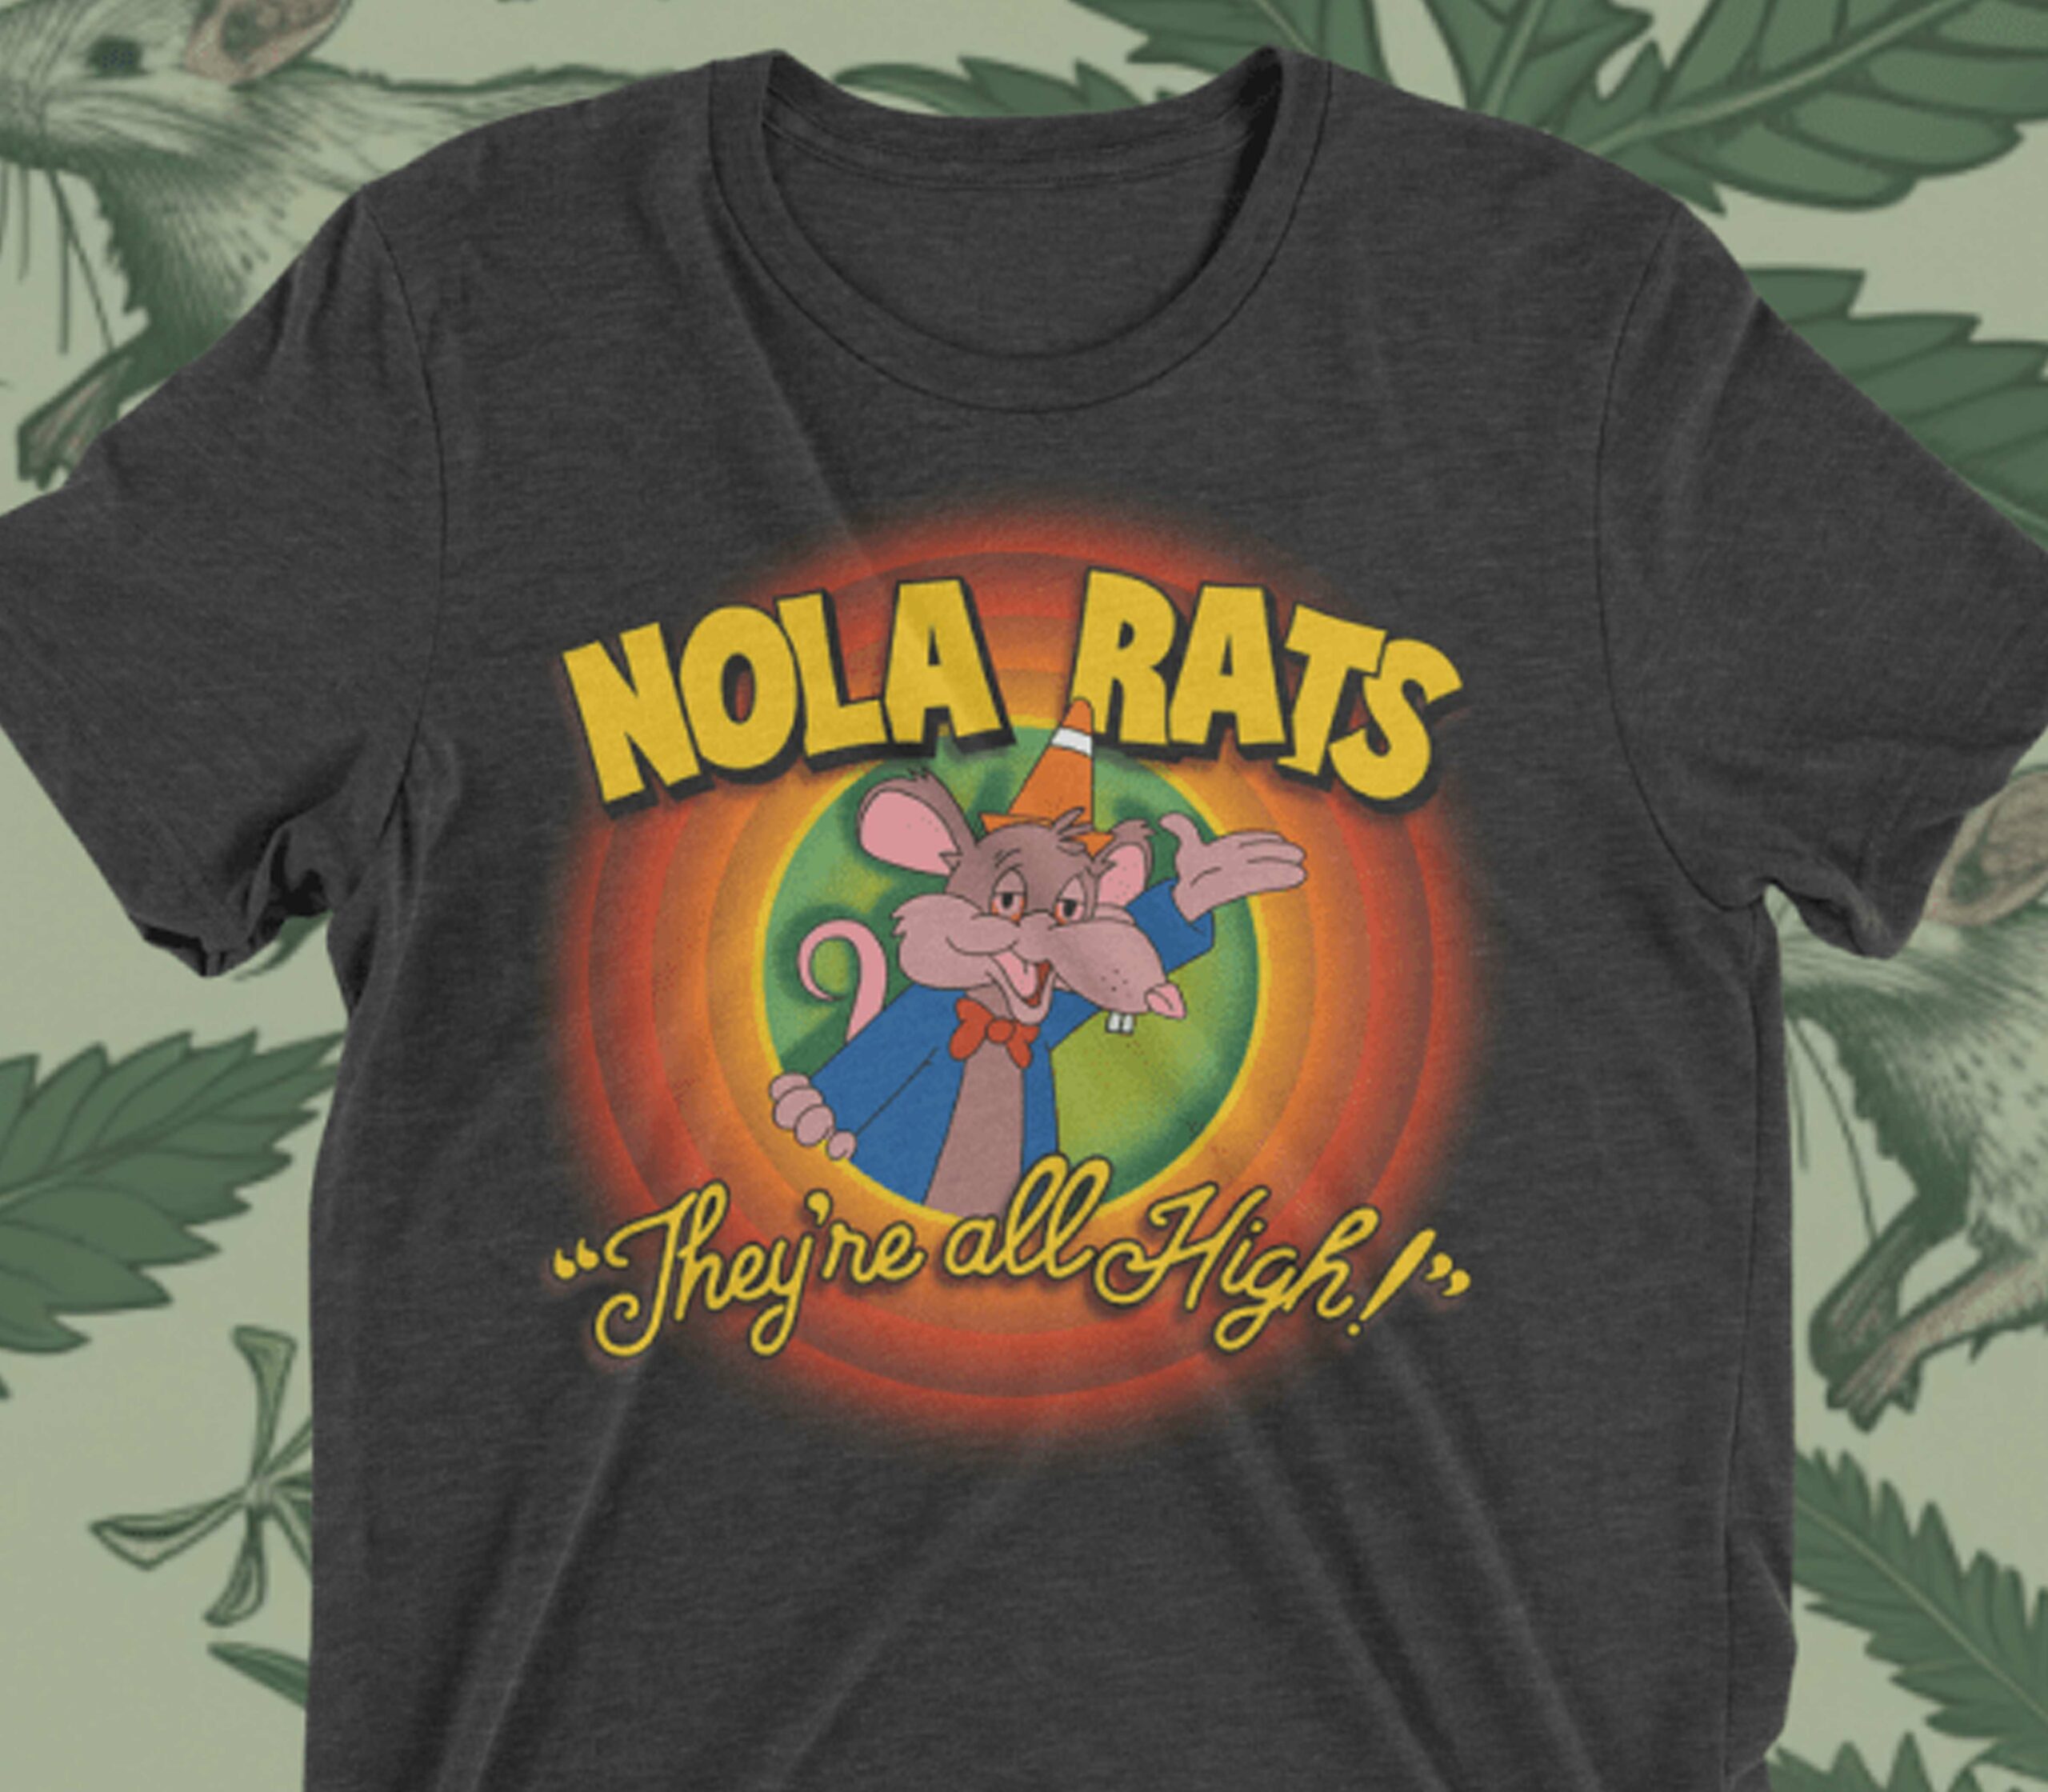 Fresh Dirty Coast tee playfully nods to cannabis loving rodents at NOPD headquarters1